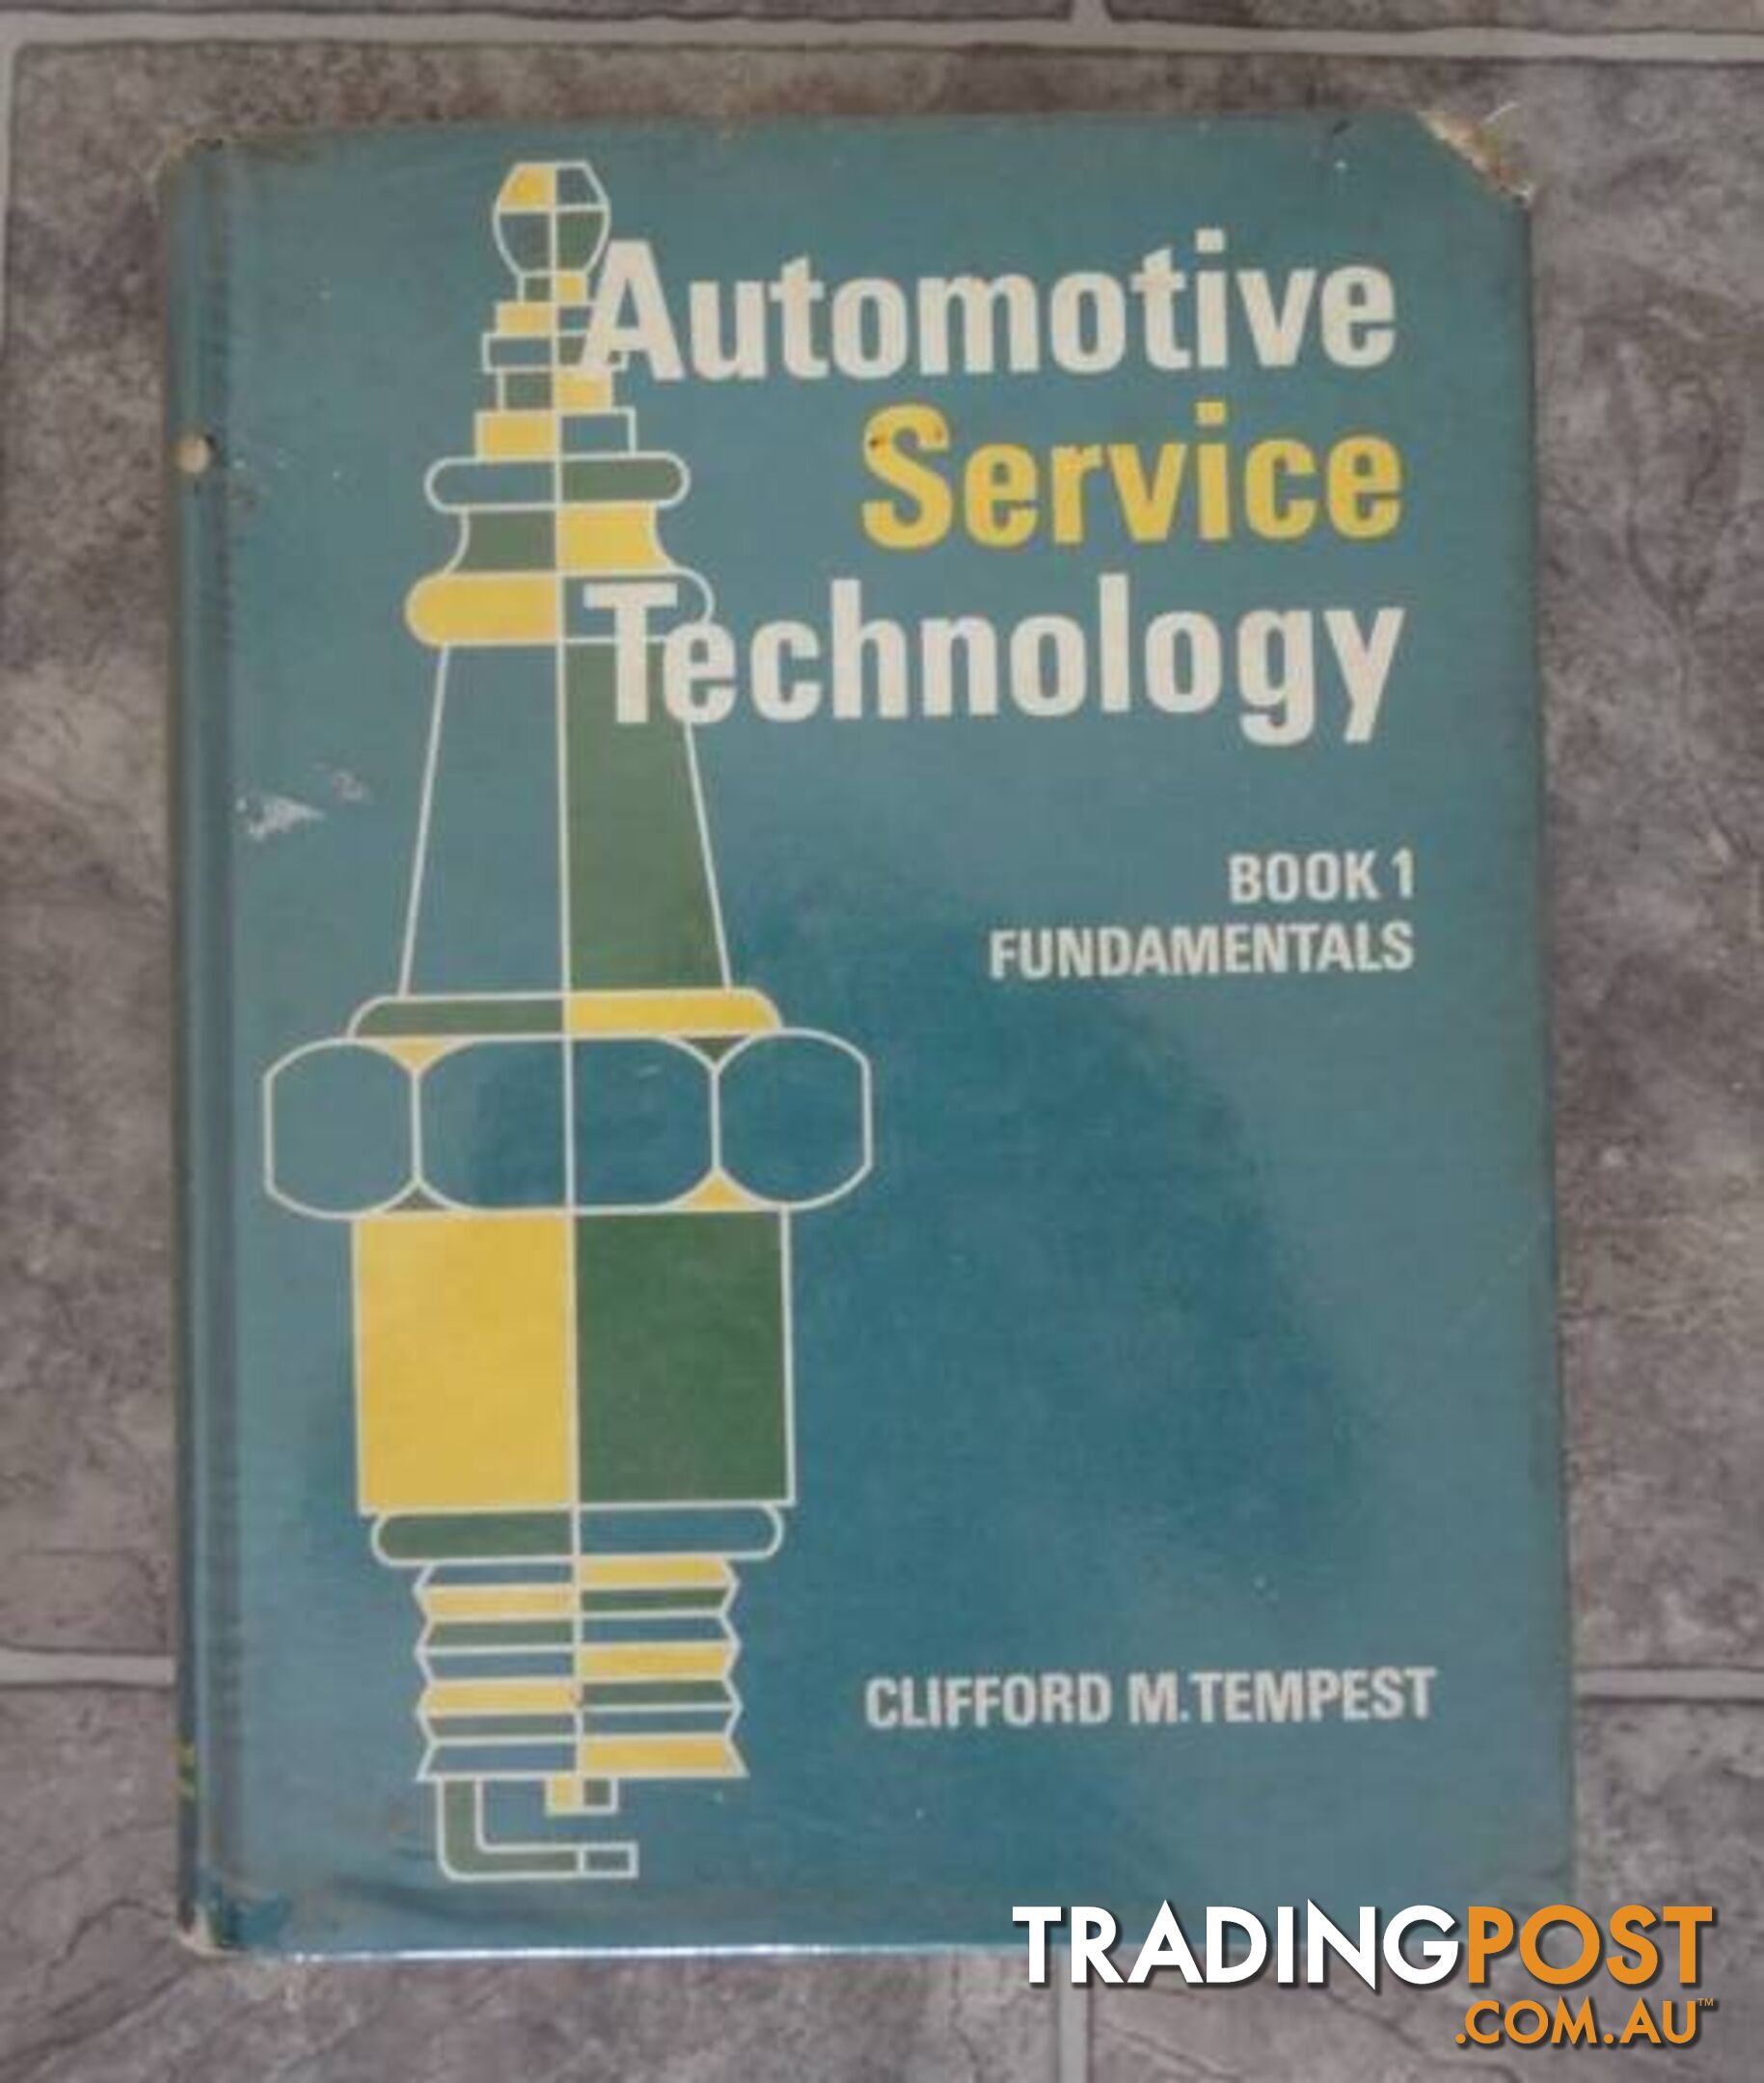 COLLECTABLE OLD CAR SERVICE MANUALS. From $30